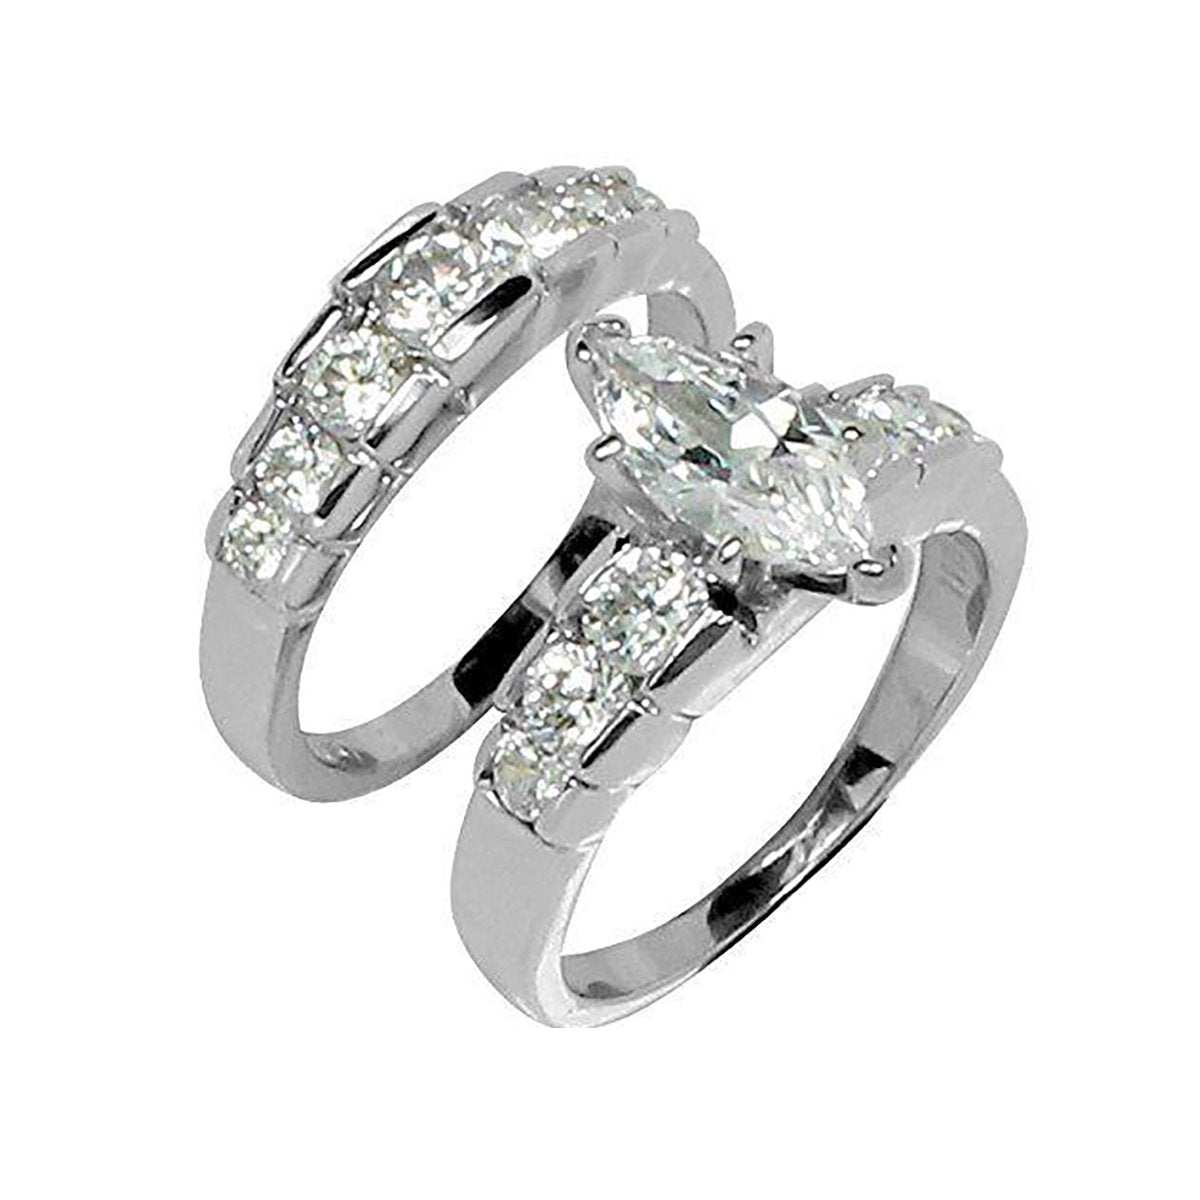 Large Prong-Set Two-Ring Marquise Cut Wedding Set Stainless Steel Rings